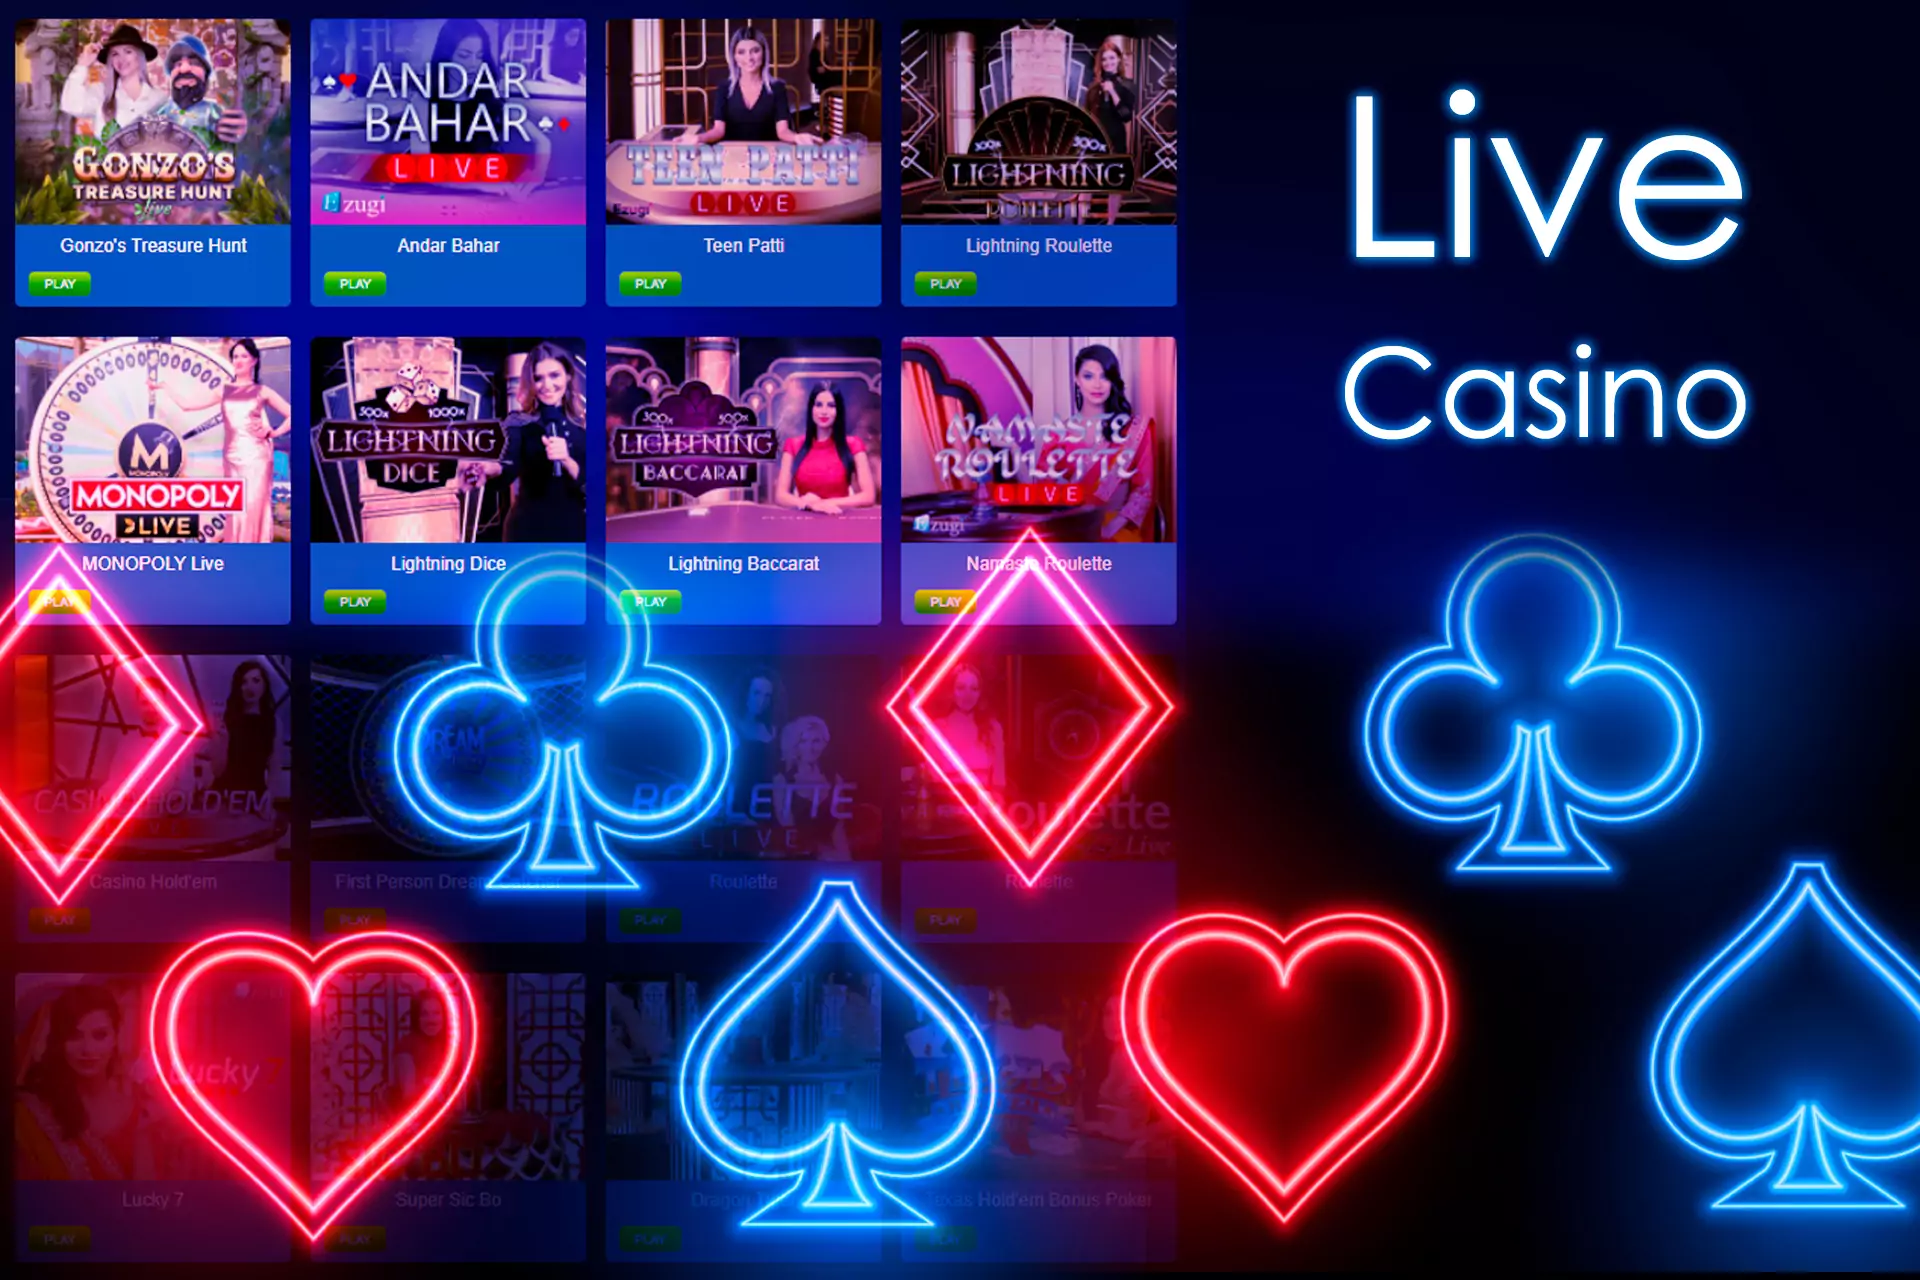 Users who appreciate games with a live dealer should try the possibilities of the Live Casino.